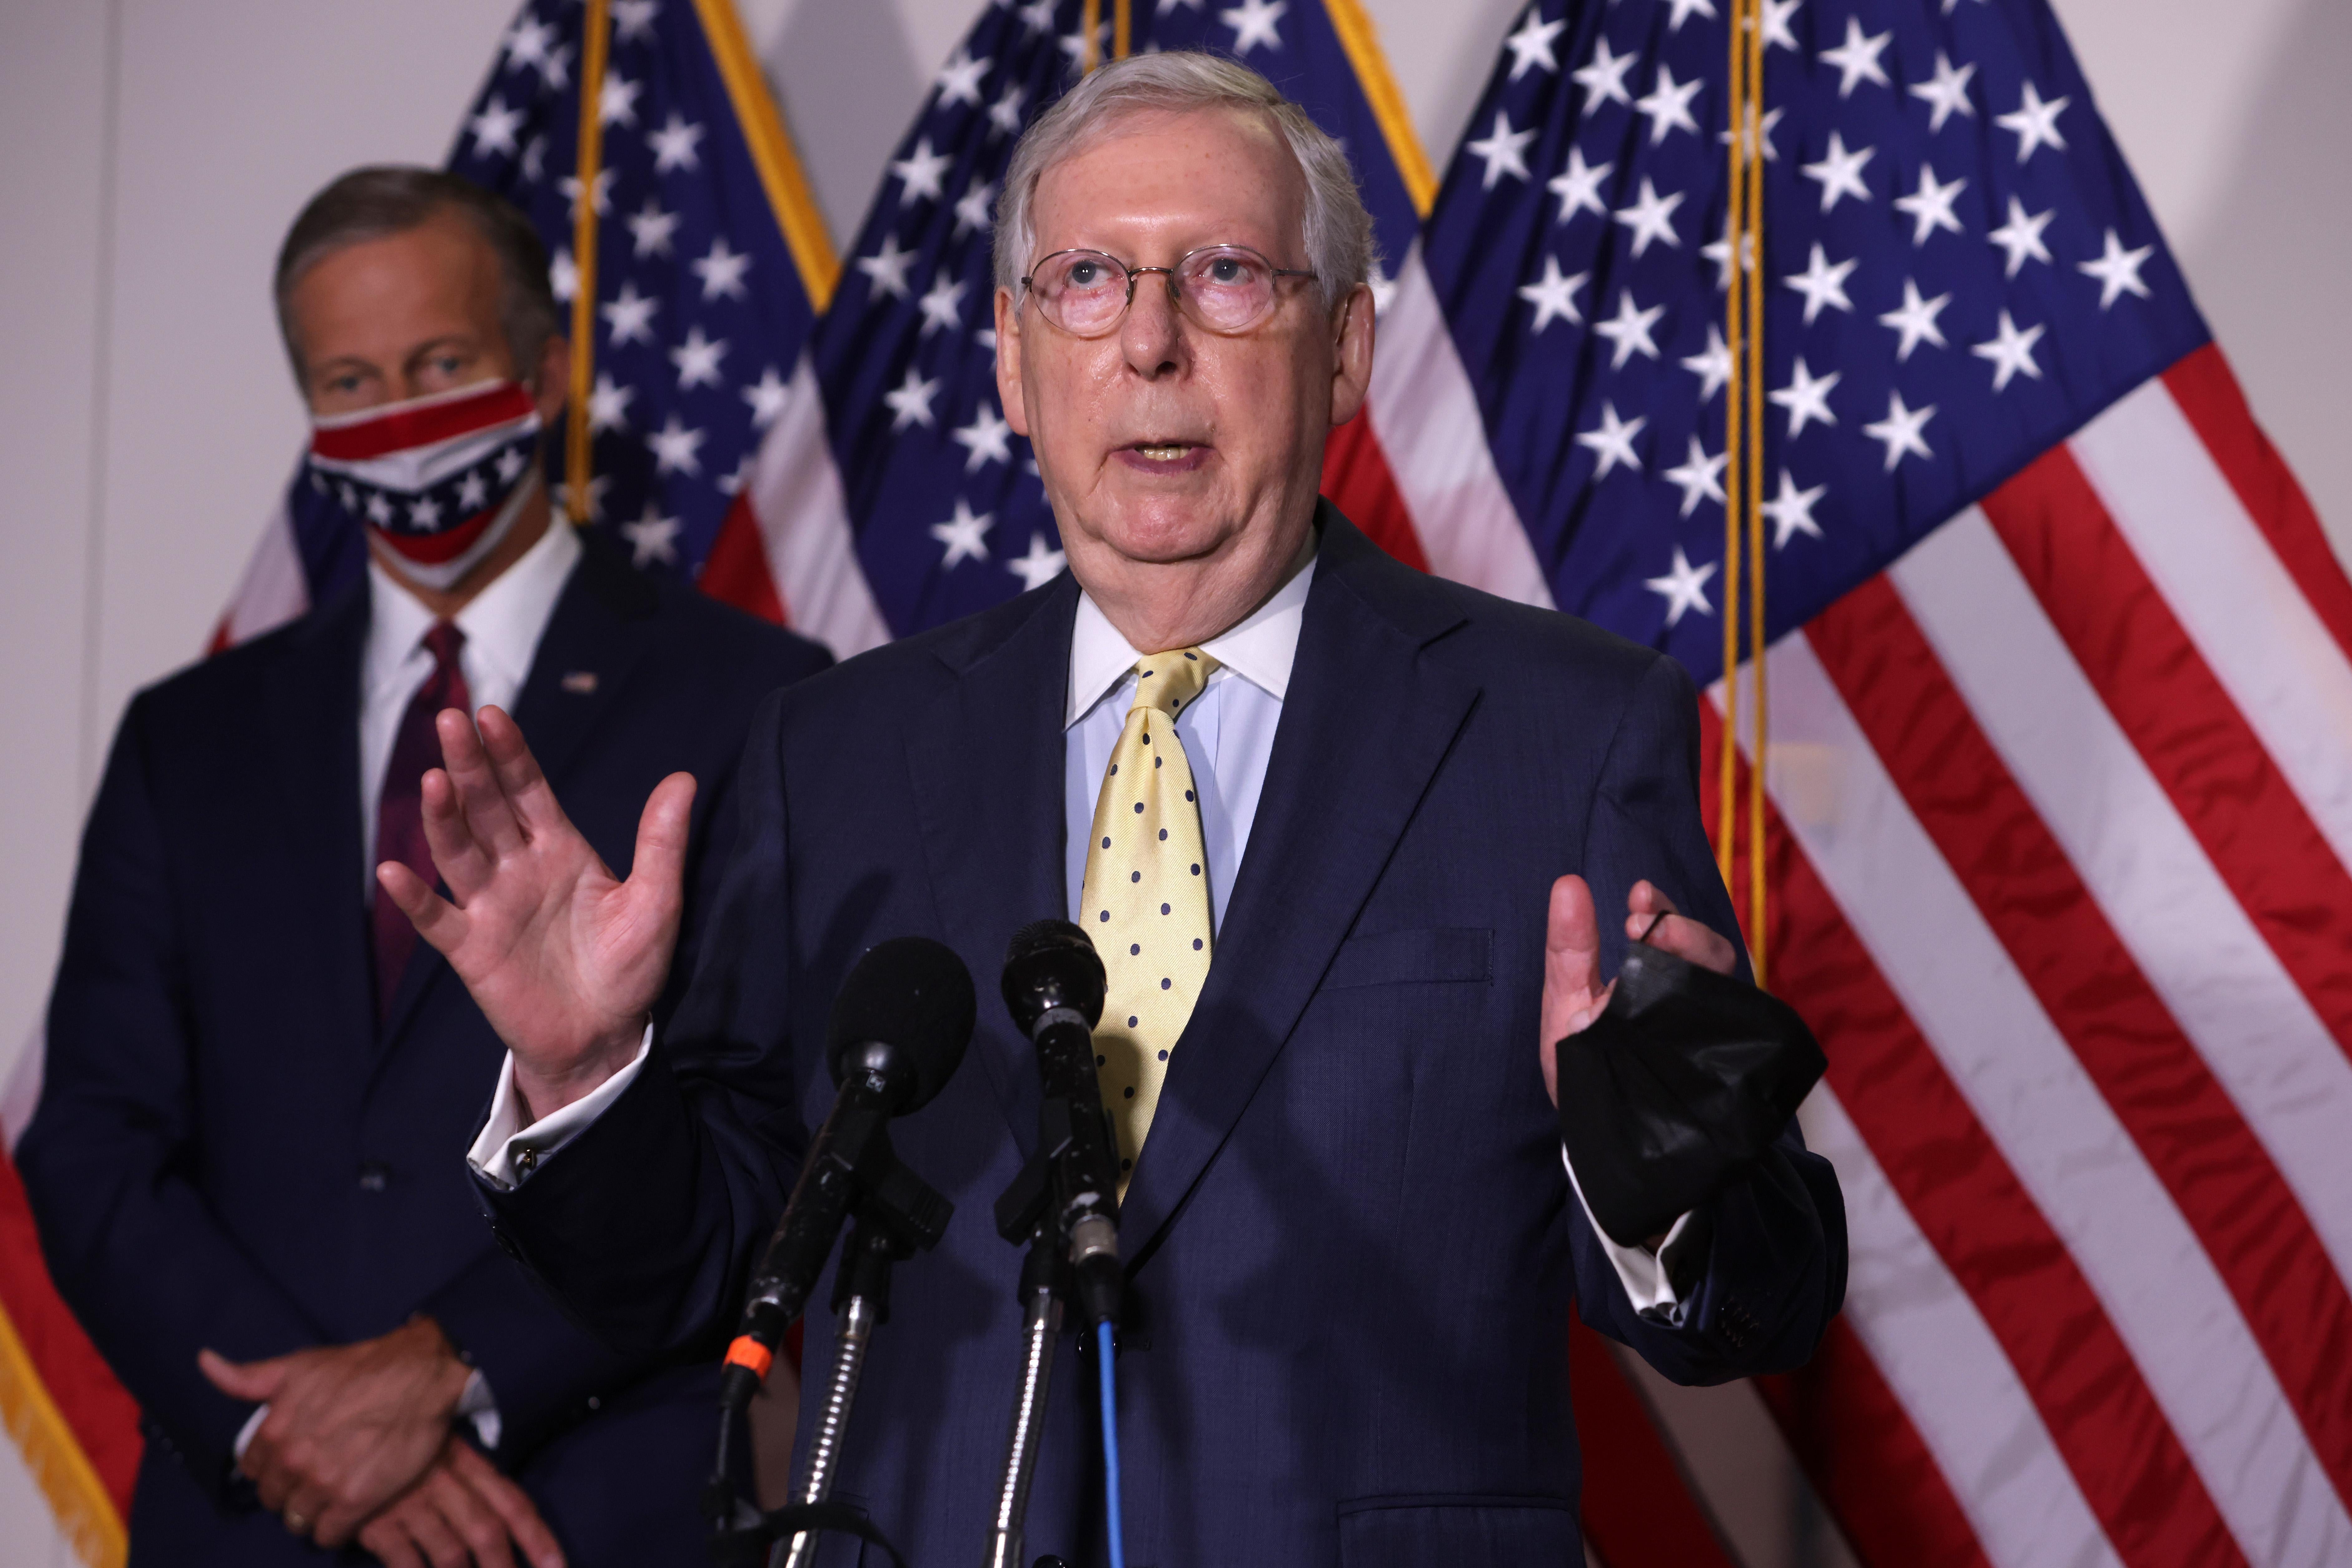 Mitch McConnell speaks into two microphones while standing in front of John Thune and some American flags.